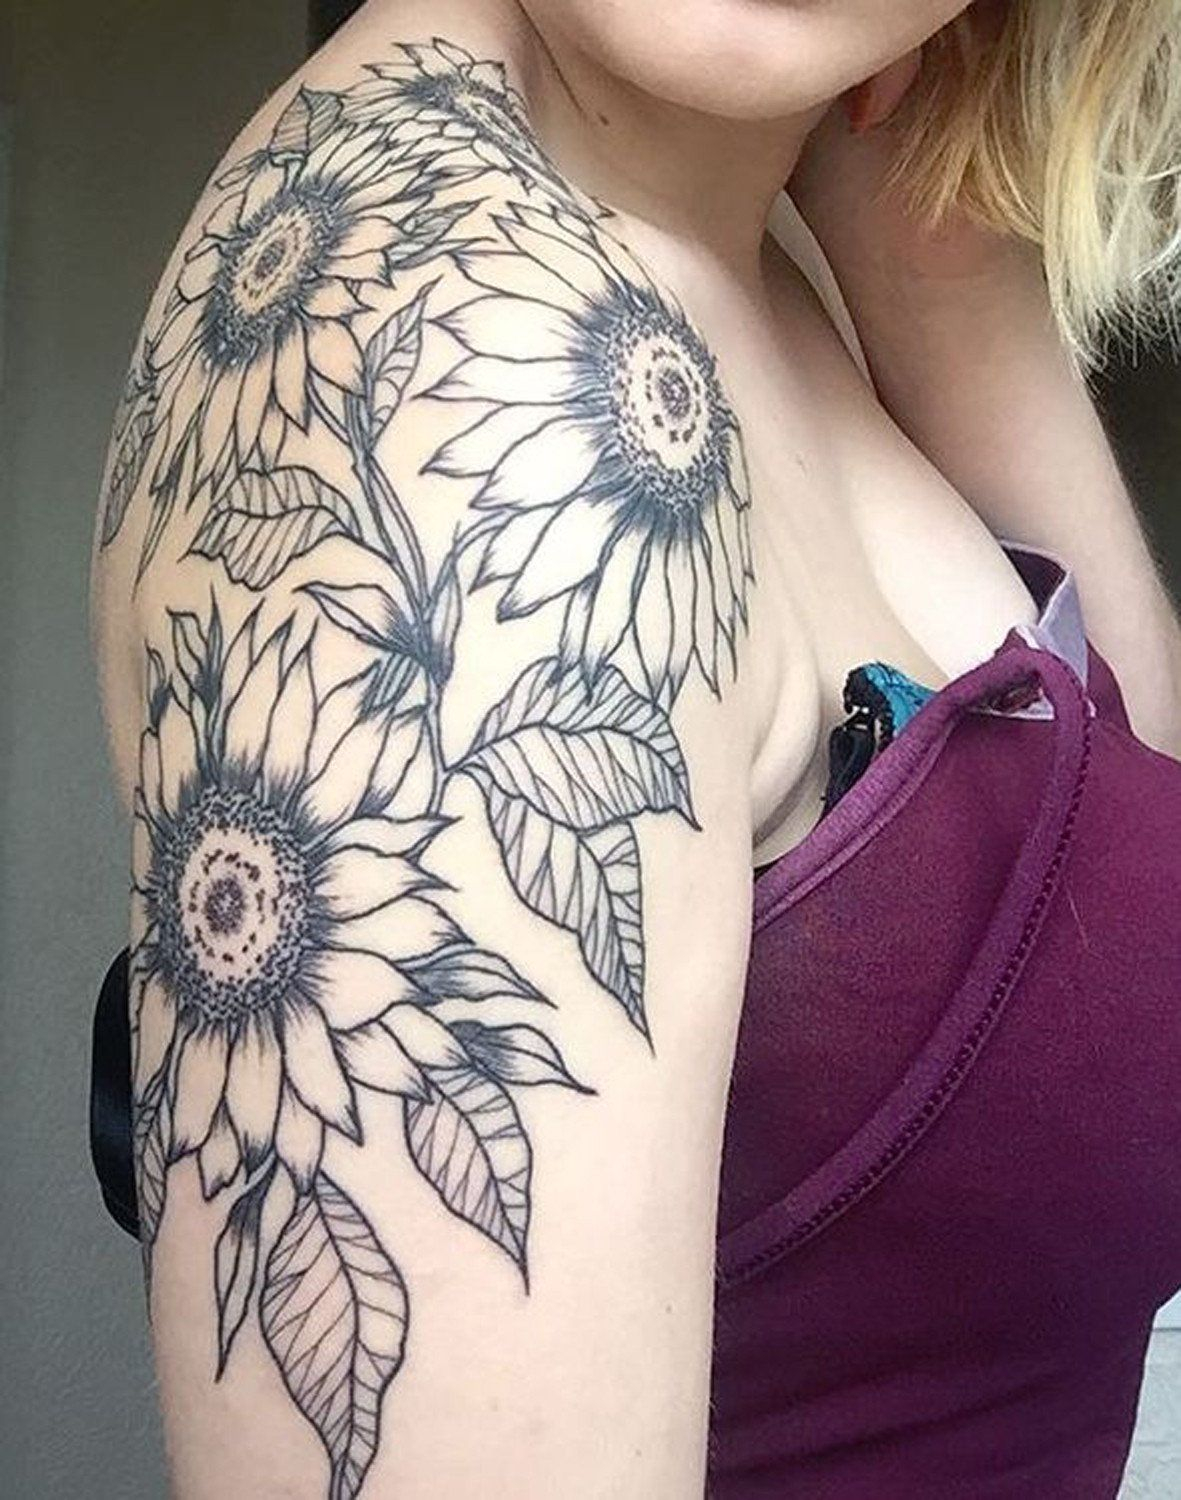 Full Arm Sleeve Sunflower Floral Tattoo Ideas On Shoulder For Women in dimensions 1181 X 1500